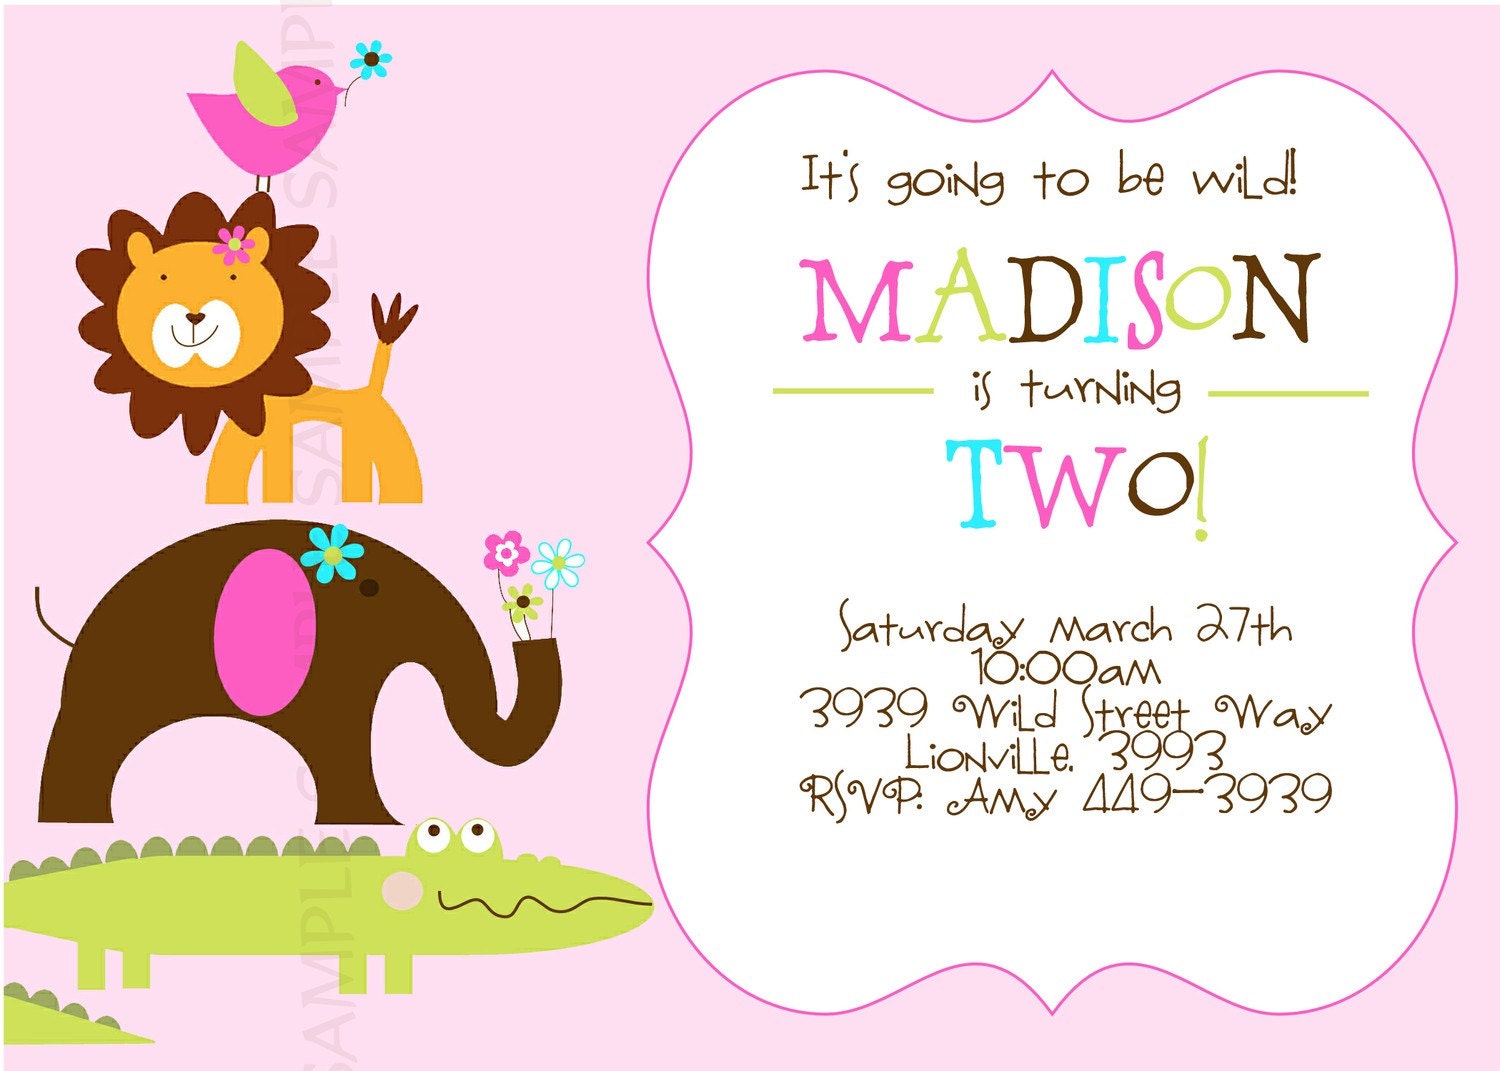 WILD PARTY Safari/Zoo/Jungle theme for GIRL Invitation.Photo or no photo option. Baby Shower or Birthday Party